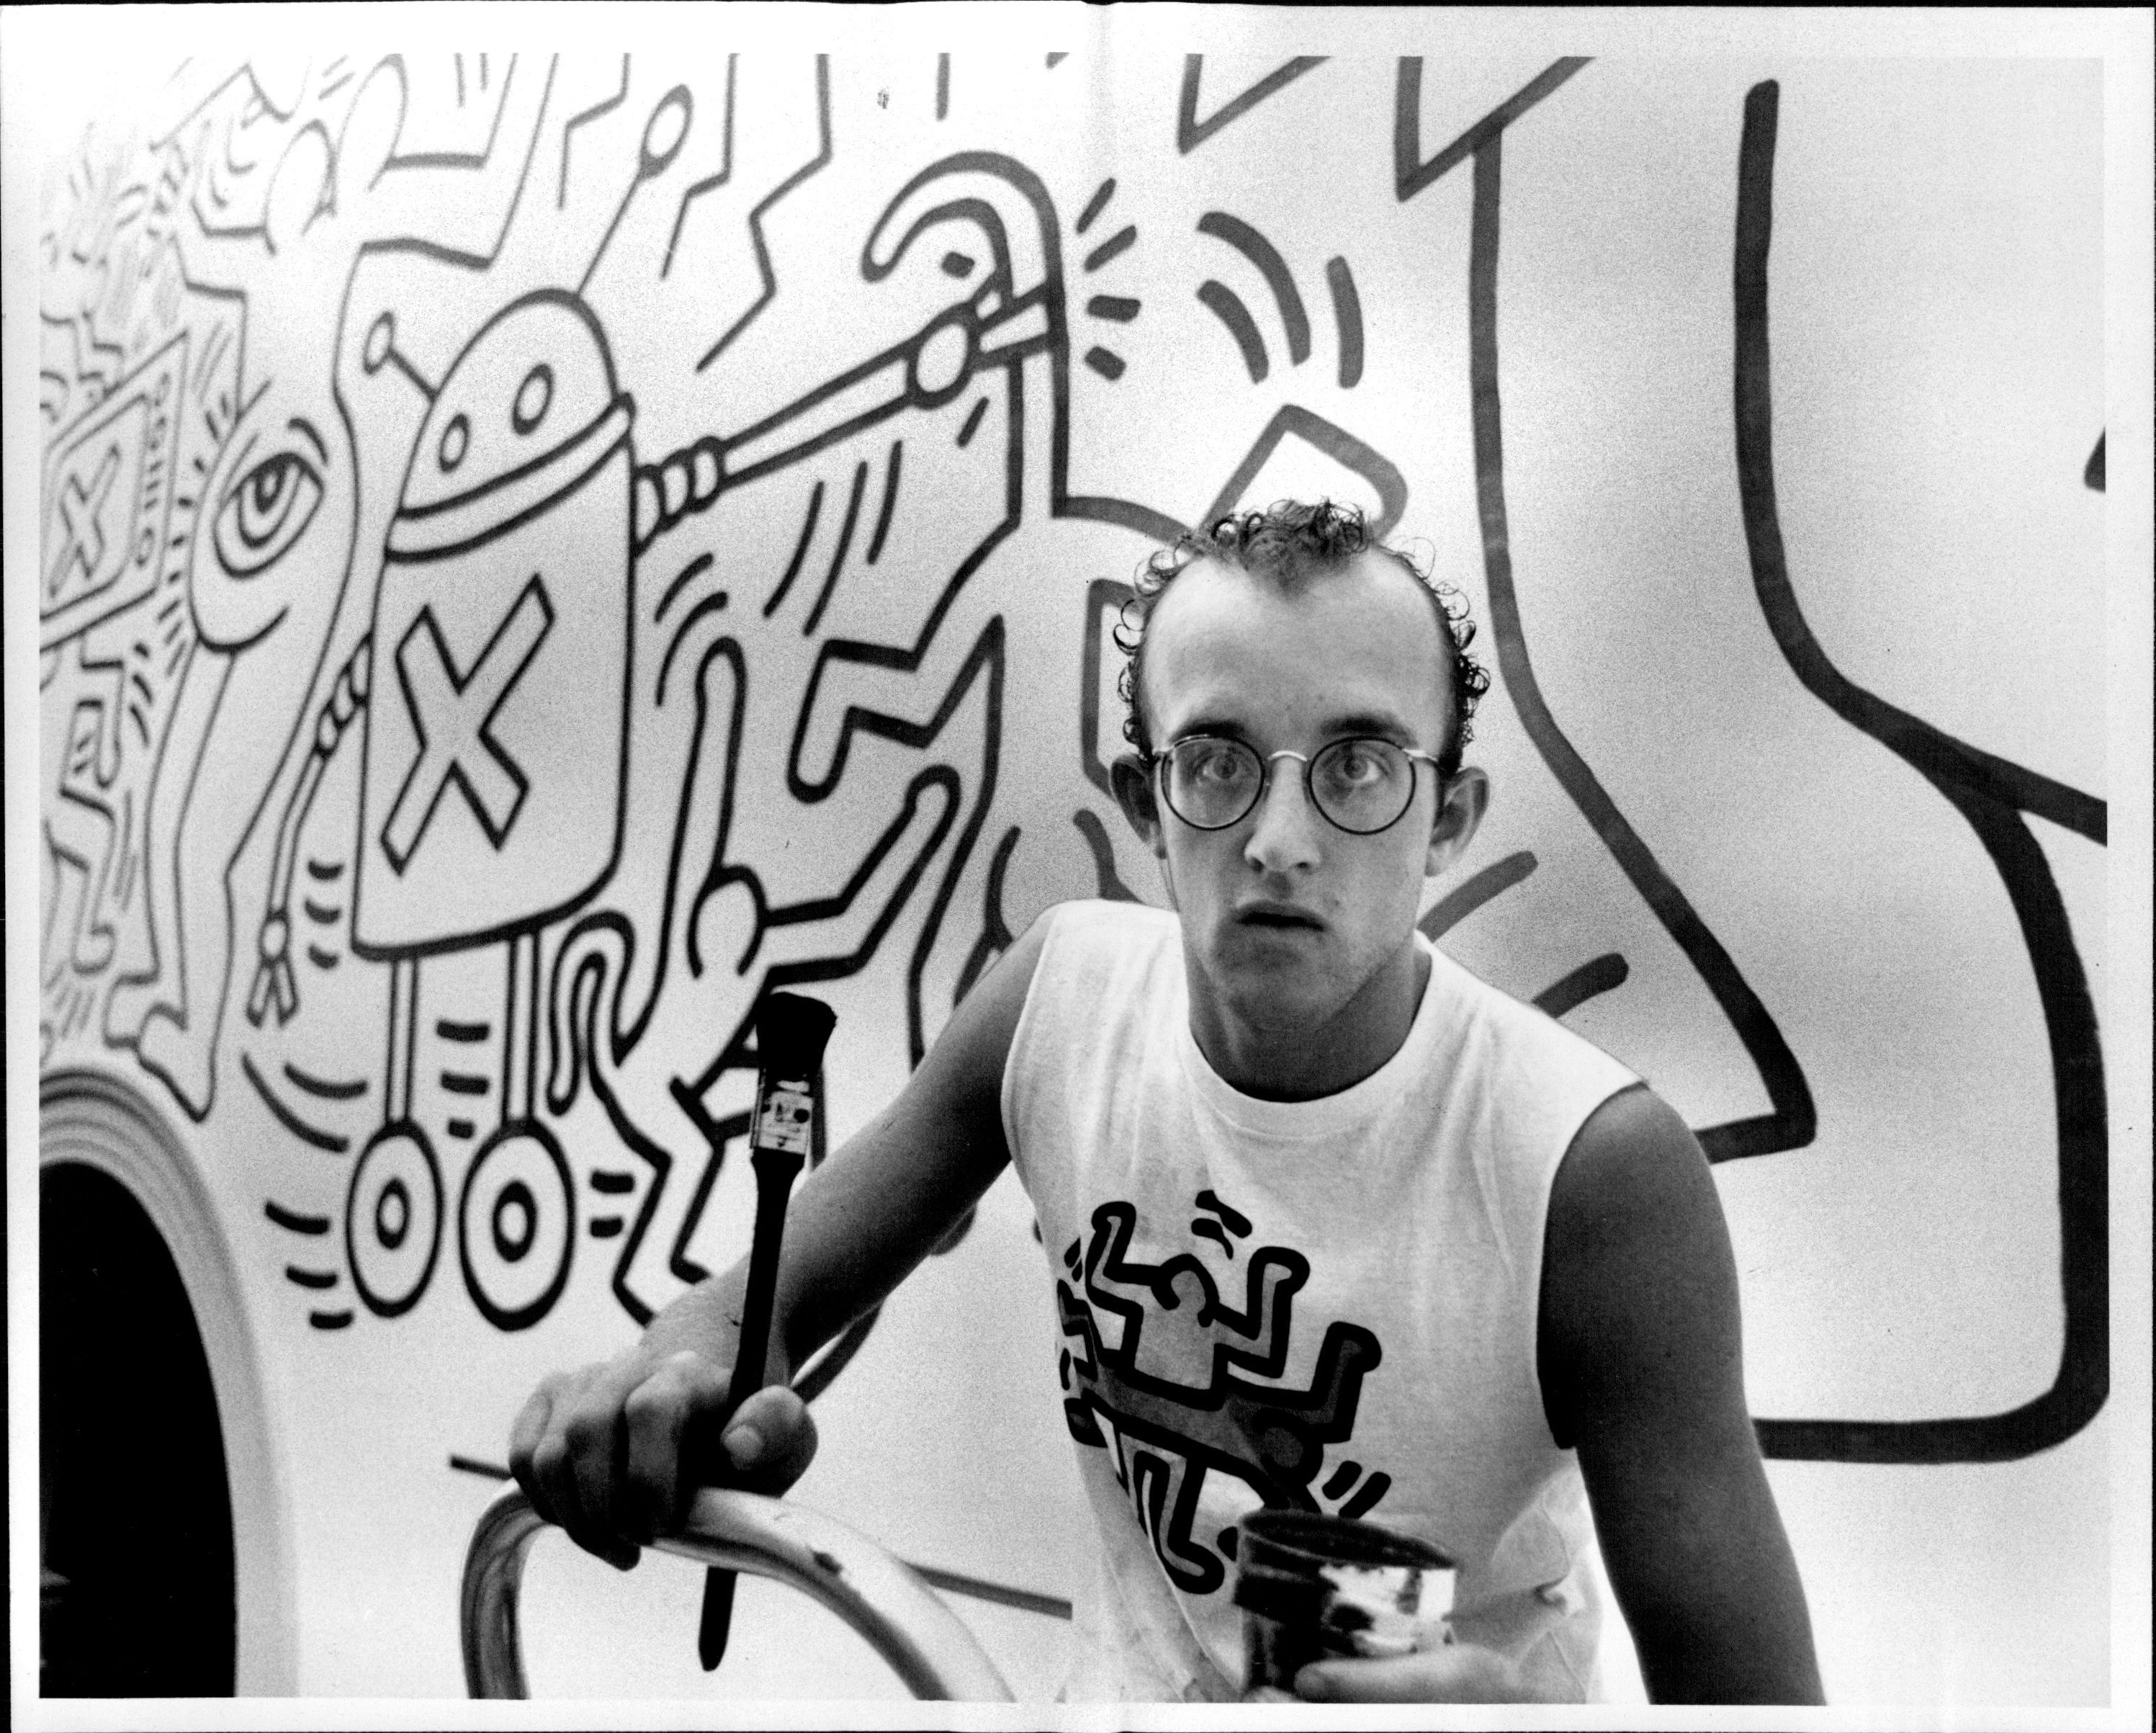 A Three Story Mural Keith Haring Created For A Catholic Youth Center Sold For 3 9 Million To The Chagrin Of The Artist S Foundation Artnet News